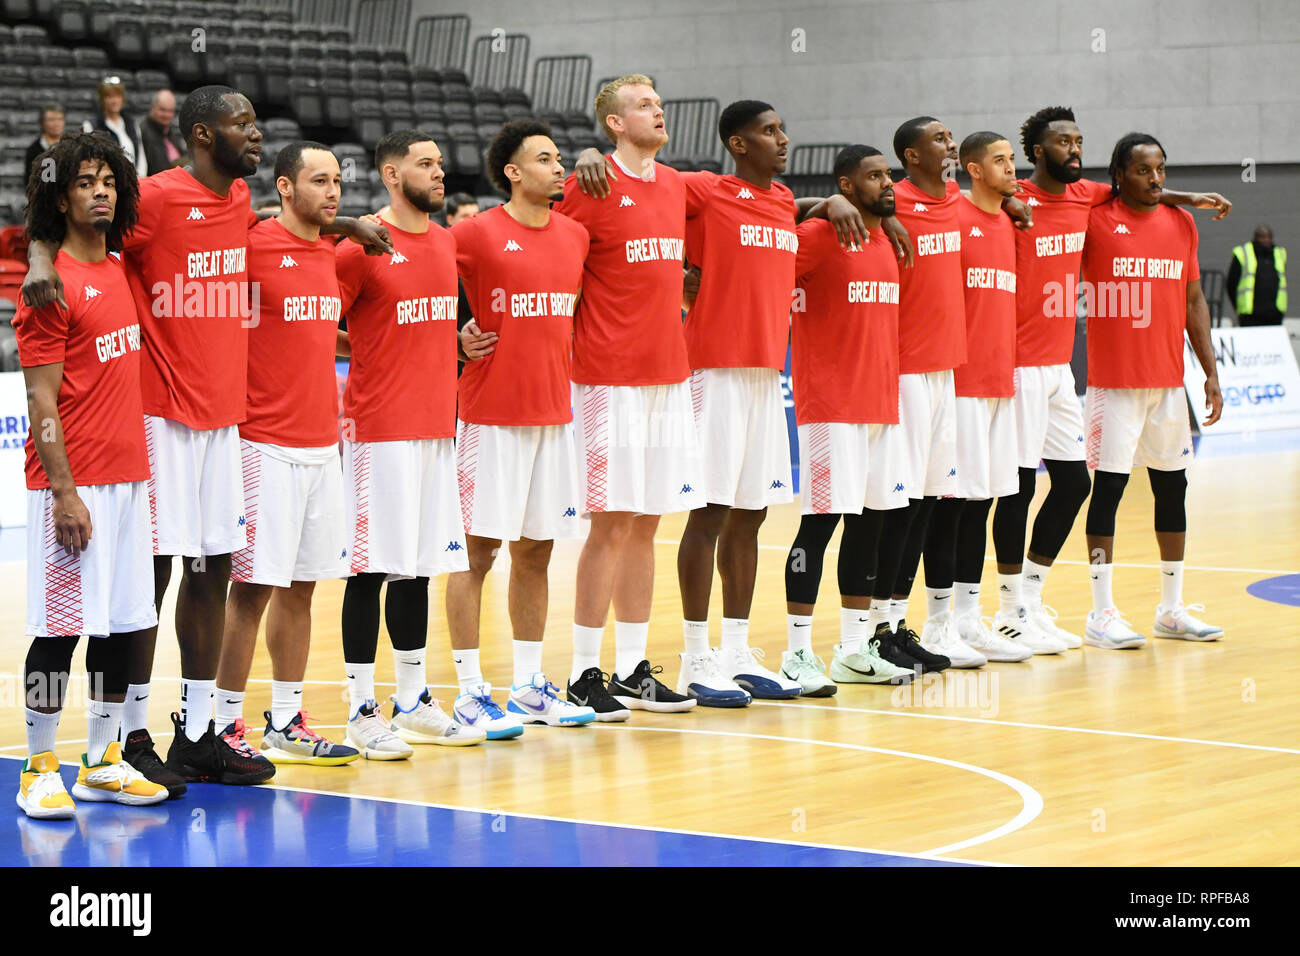 Manchester, UK. 21st Feb, 2019. Team GB Men’s Basketball team beat Cyprus 84-47 at the National Basketball Performance Centre, Manchester, UK. Credit: JS Sport Photography/Alamy Live News Stock Photo